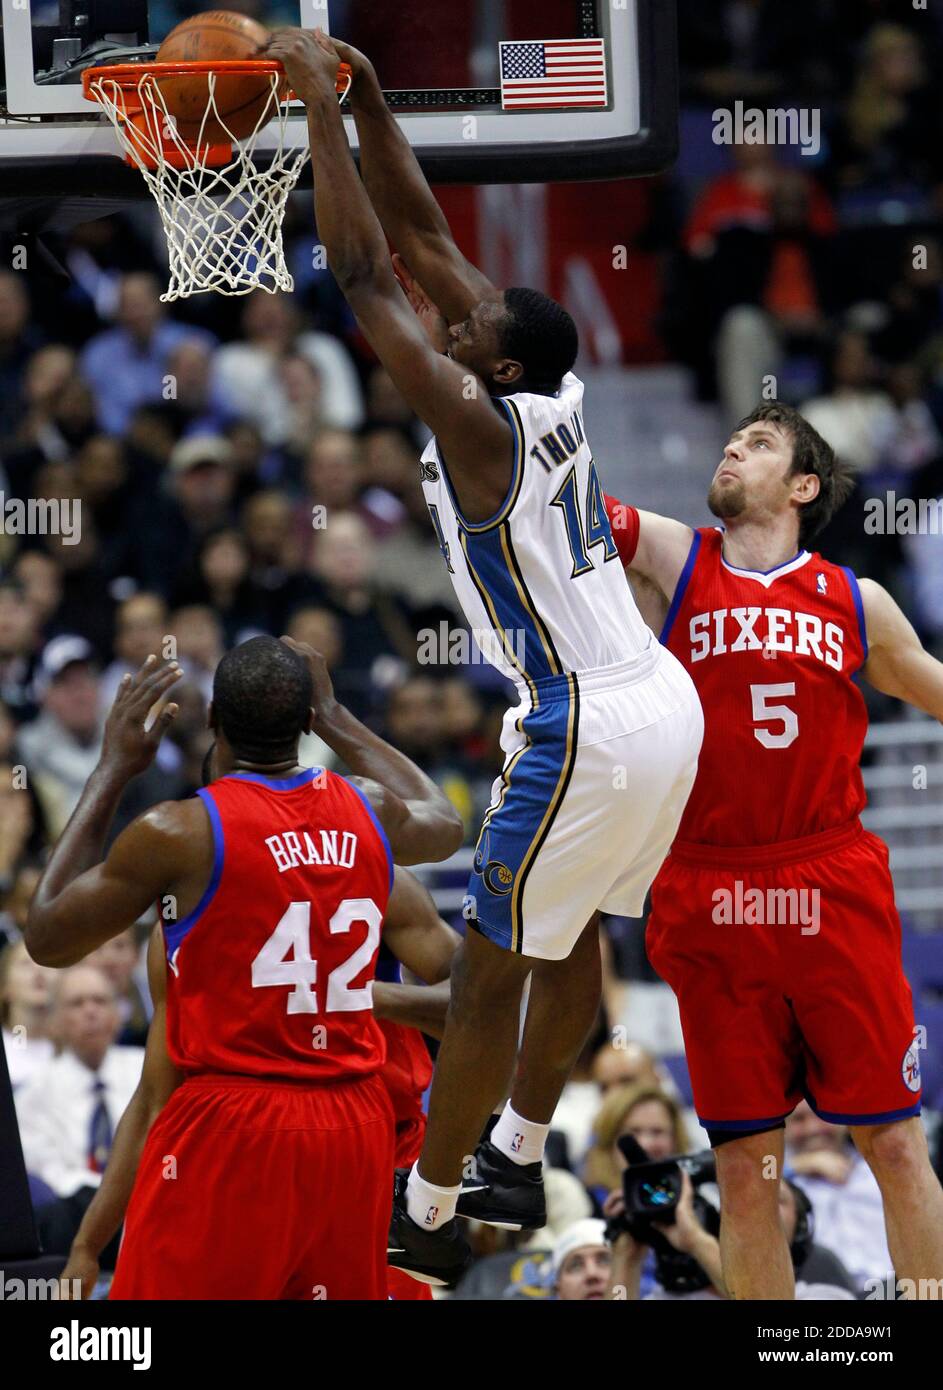 NO FILM, NO VIDEO, NO TV, NO DOCUMENTARY - The Washington Wizards' Al Thornton (14) dunks over three Philadelphia 76ers defenders during the first quarter at the Verizon Center in Washington, DC, USA on November 2, 2010. Photo by Chuck Myers/MCT/ABACAPRESS.COM Stock Photo